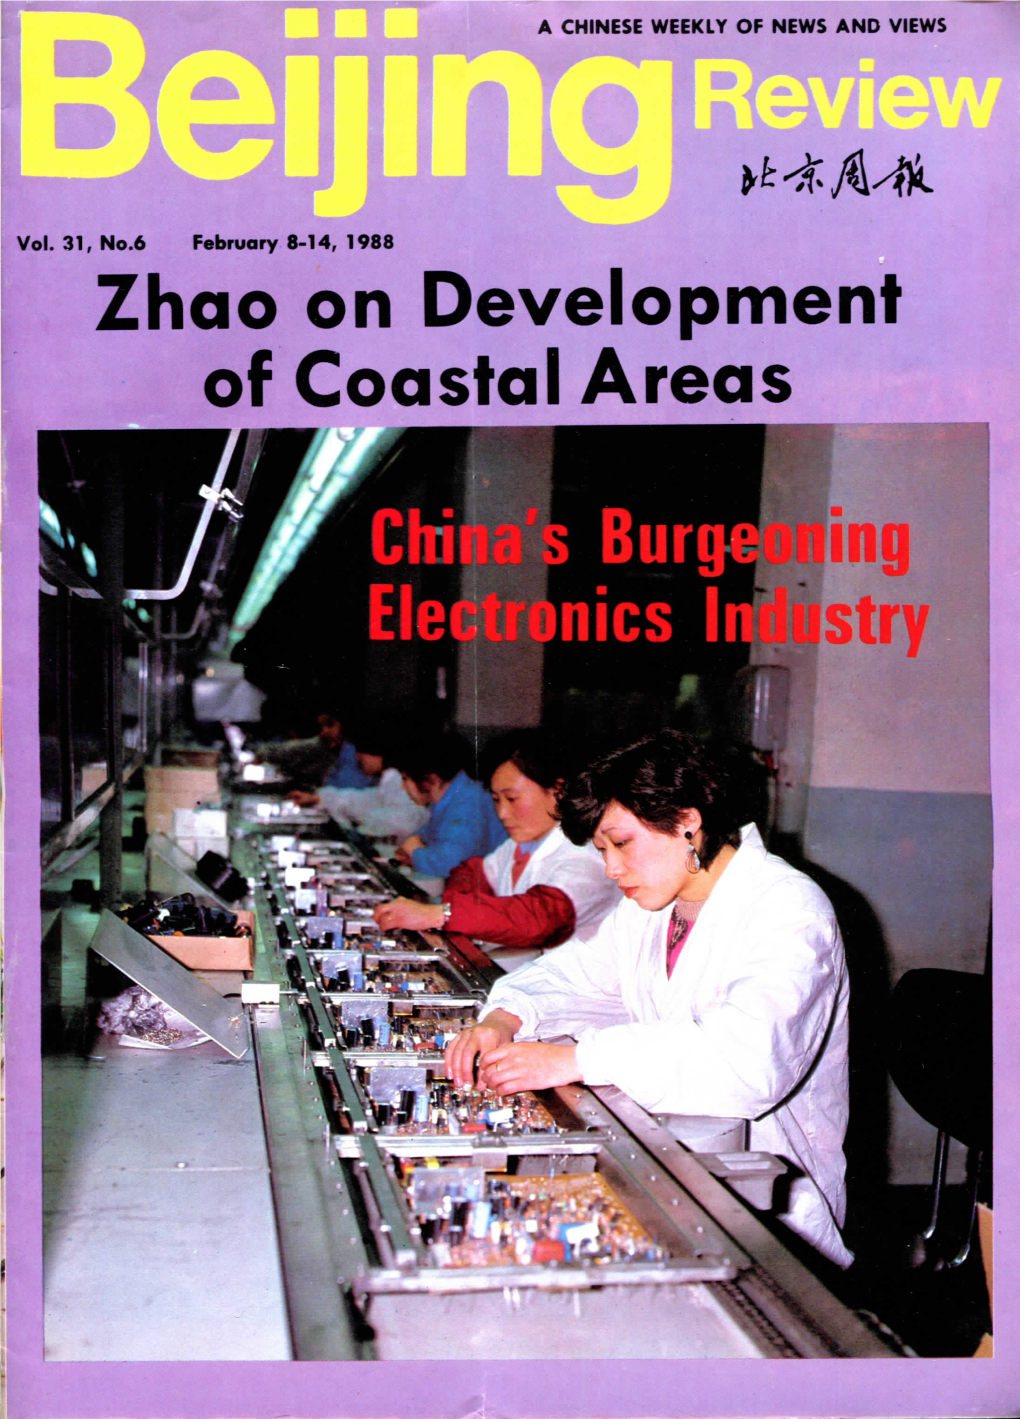 Zhao on Development of Coastal Areas Farmers of Zhangbaling Village, Jiashan County, Aniiui Province, Studying the Control of Pests